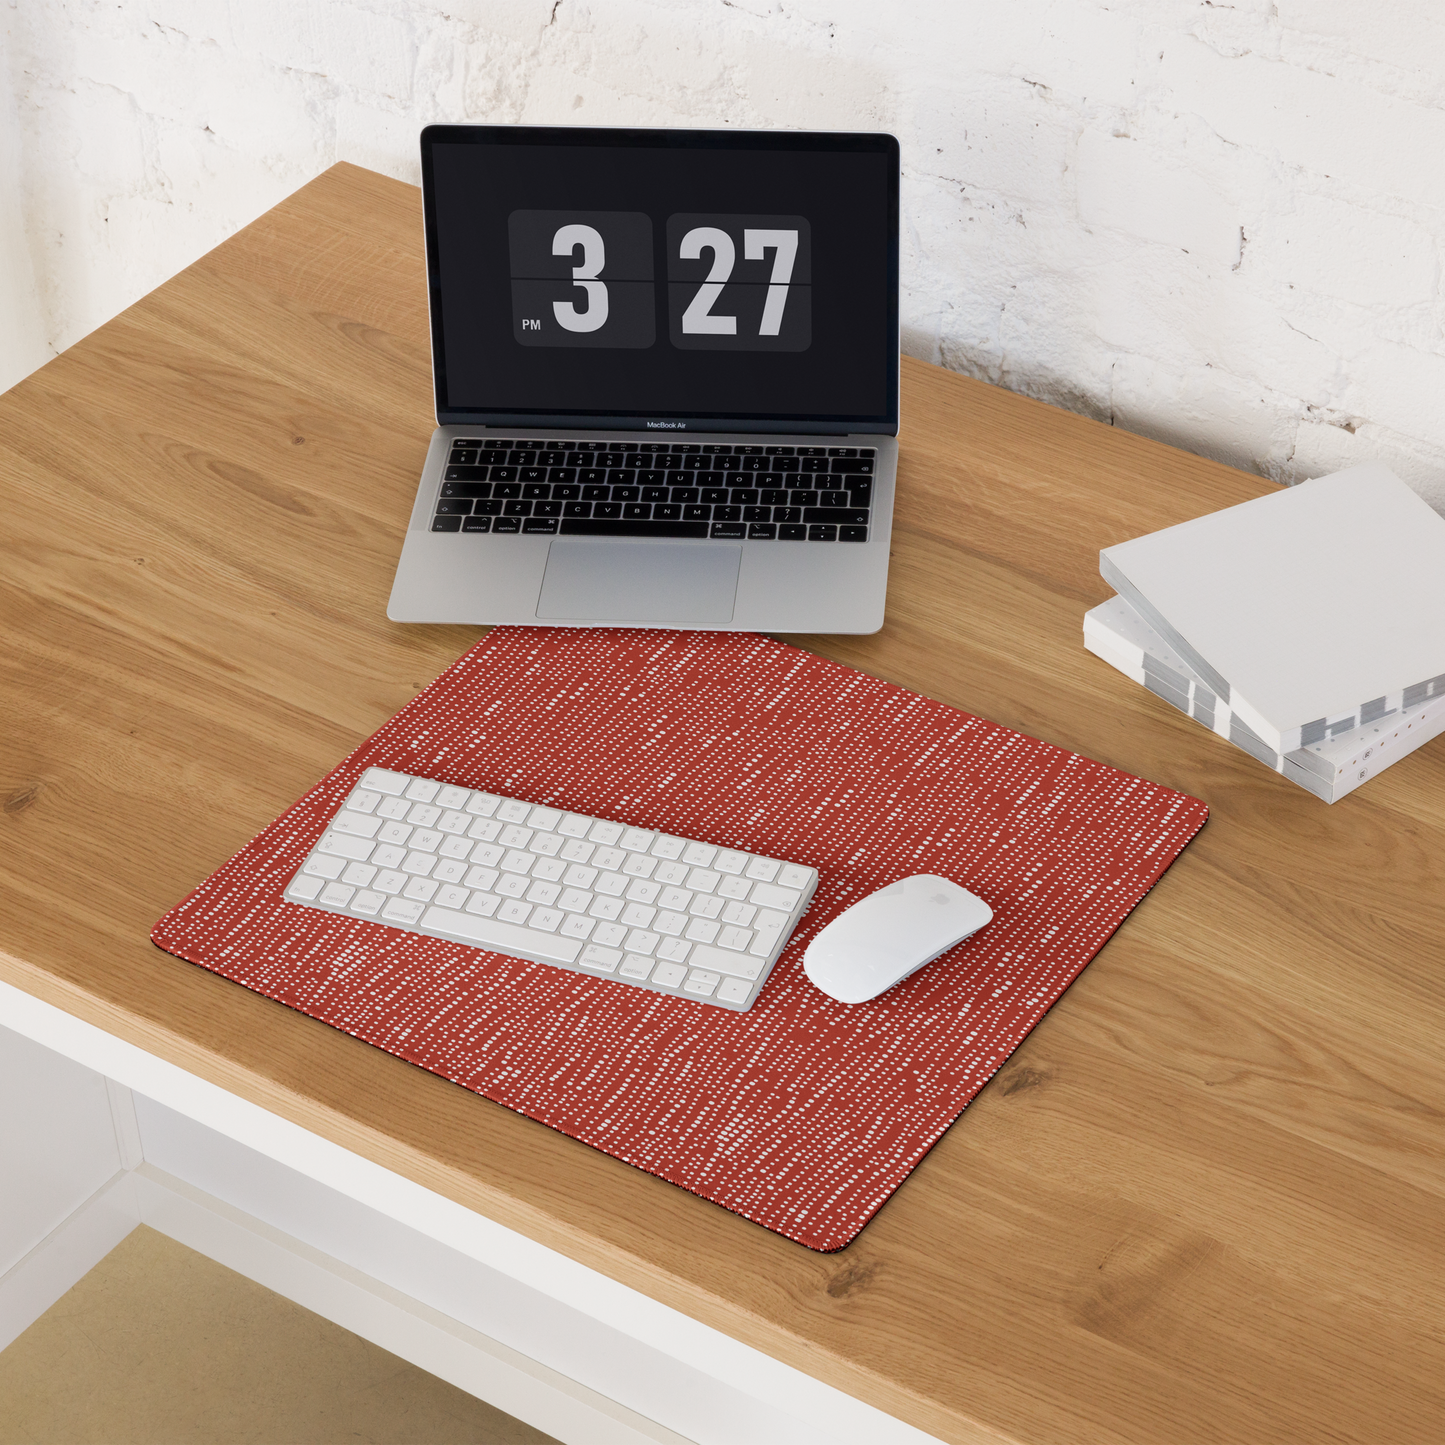 EVERYDAY USE & GAMING MOUSE PAD